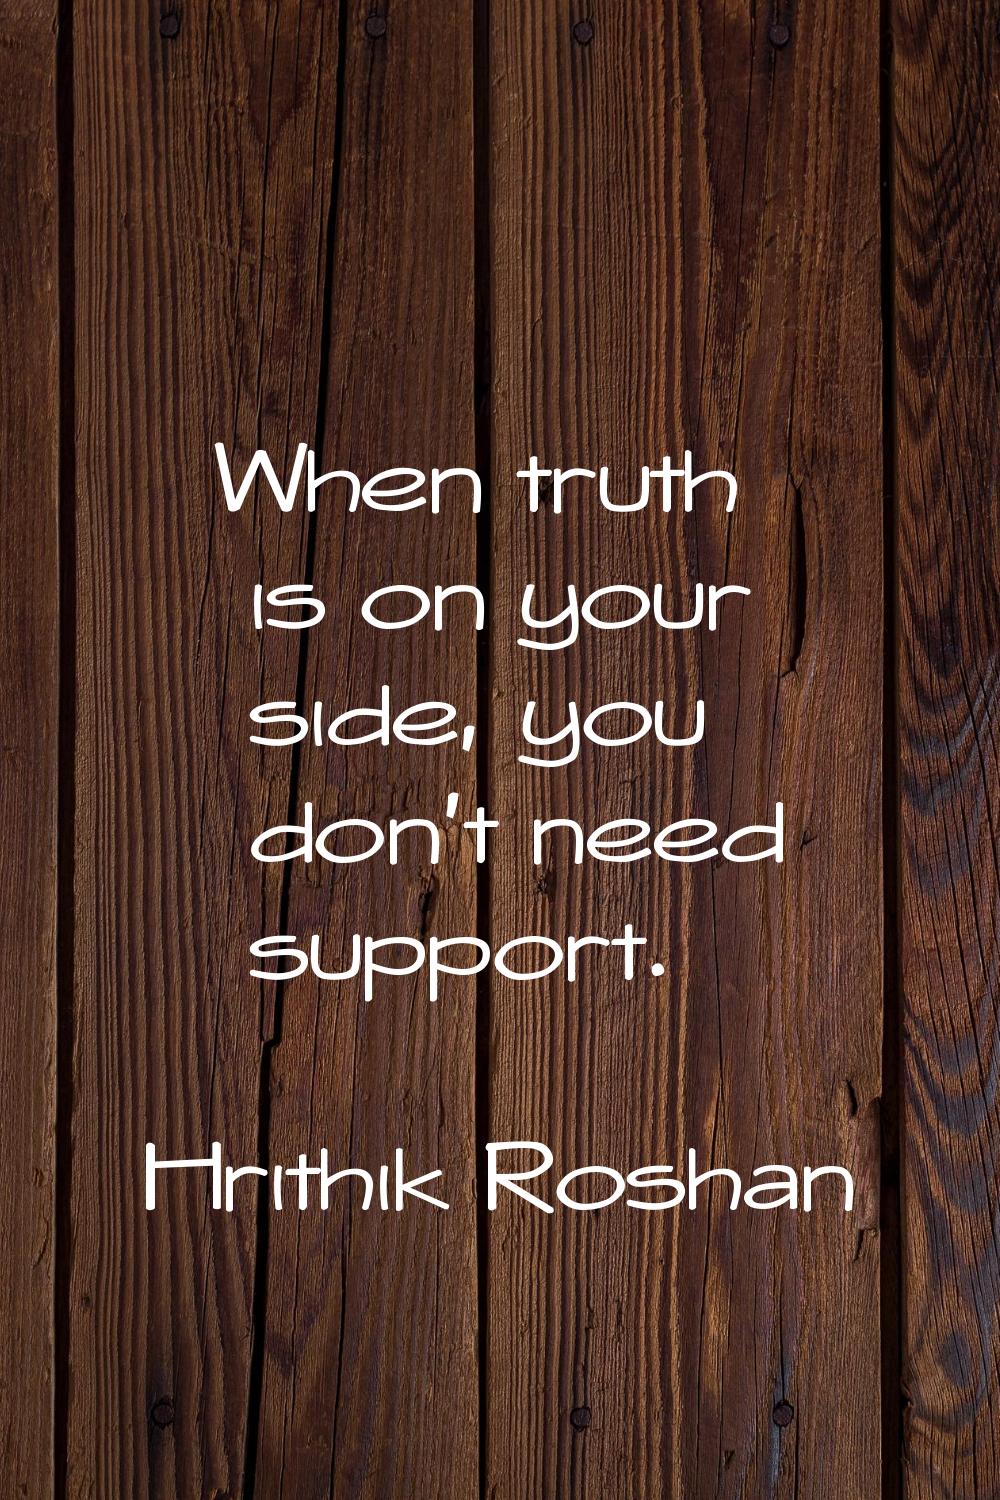 When truth is on your side, you don't need support.